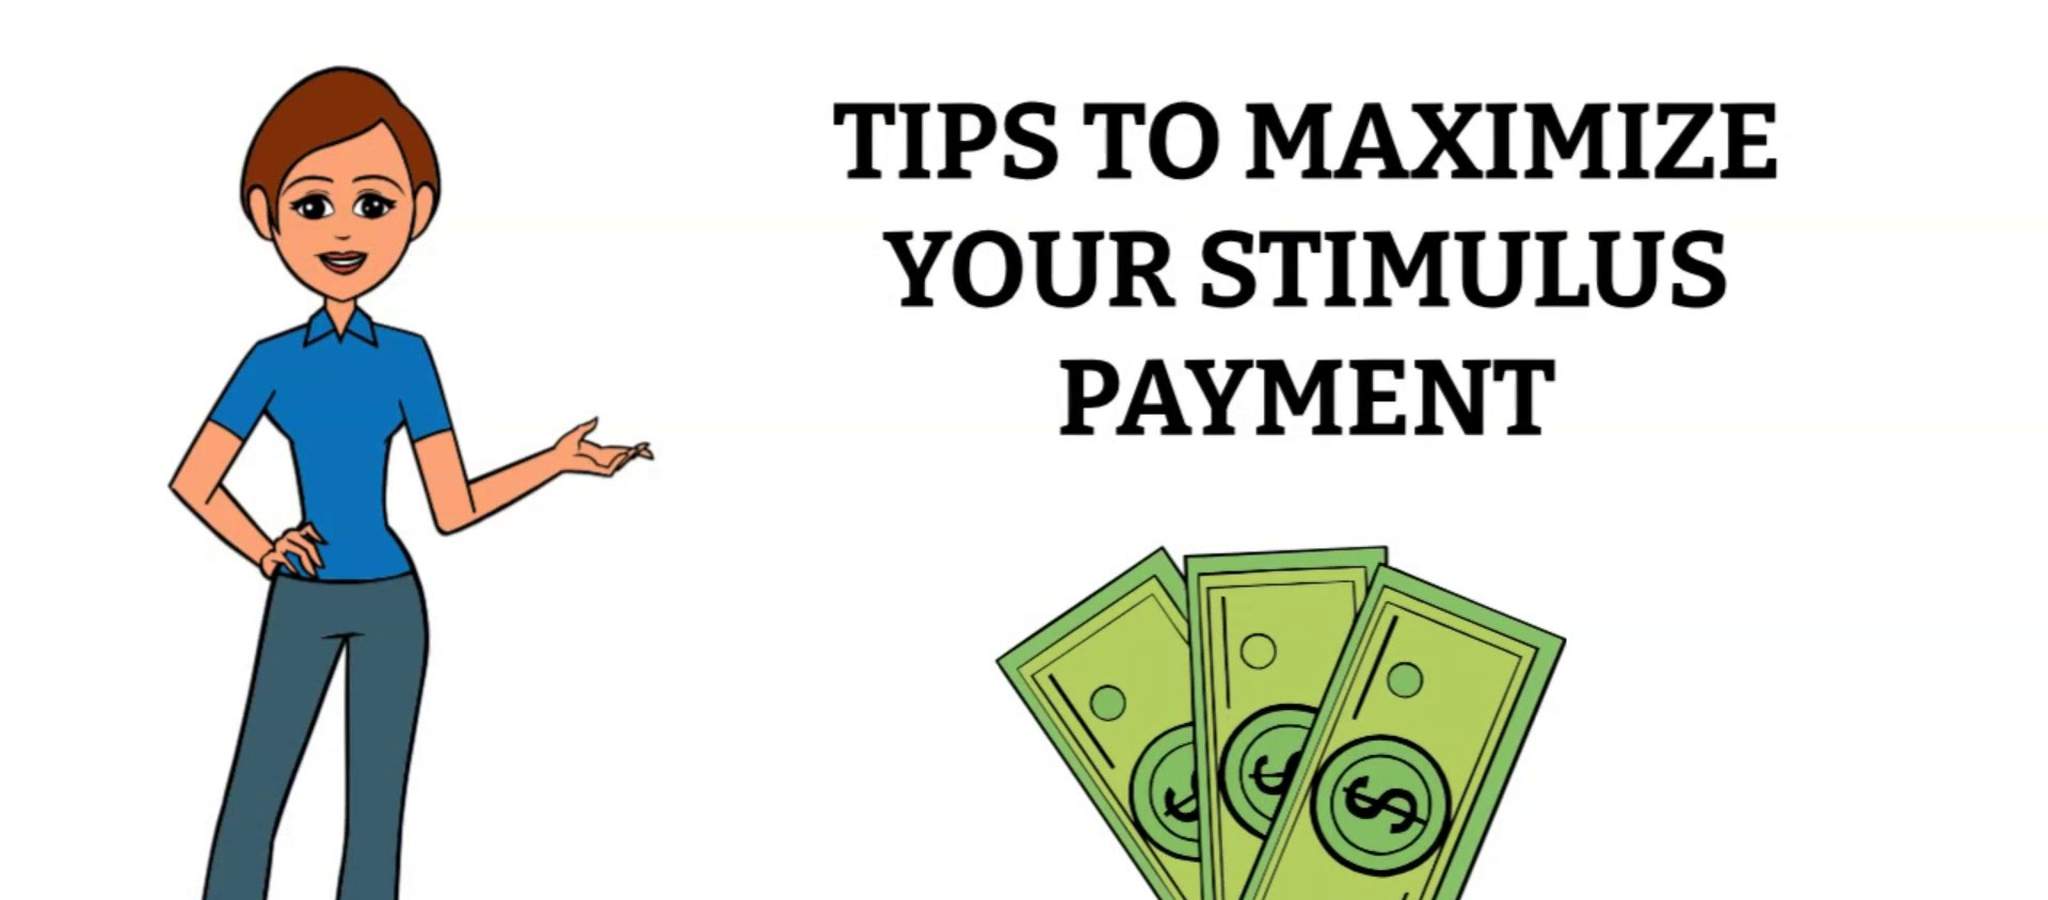 How to make the most out of your stimulus payment